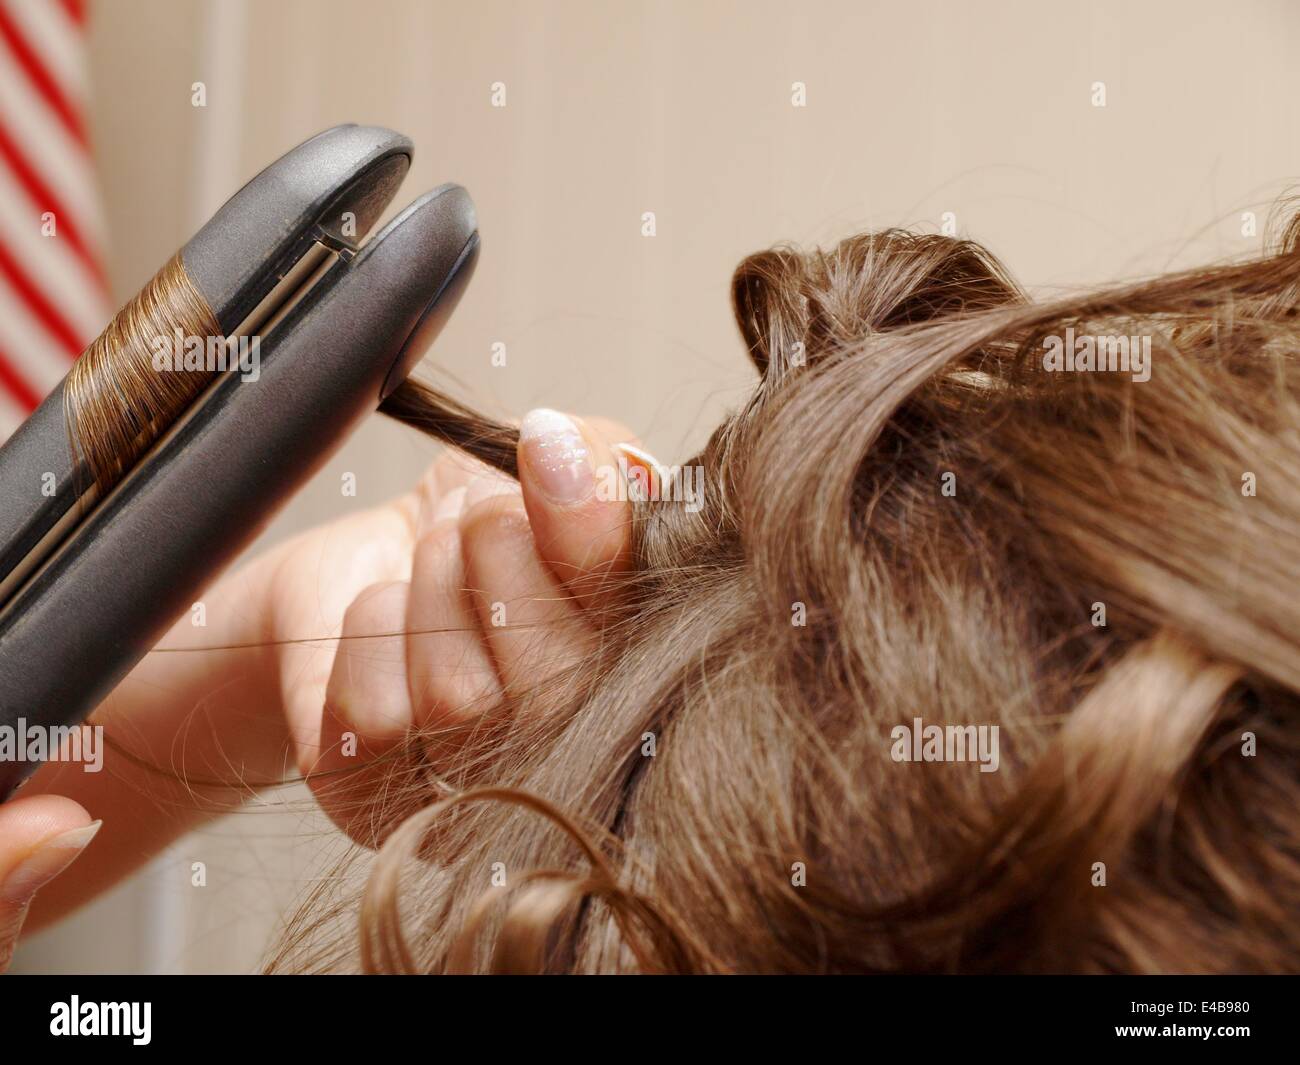 Someone styling hair Stock Photo